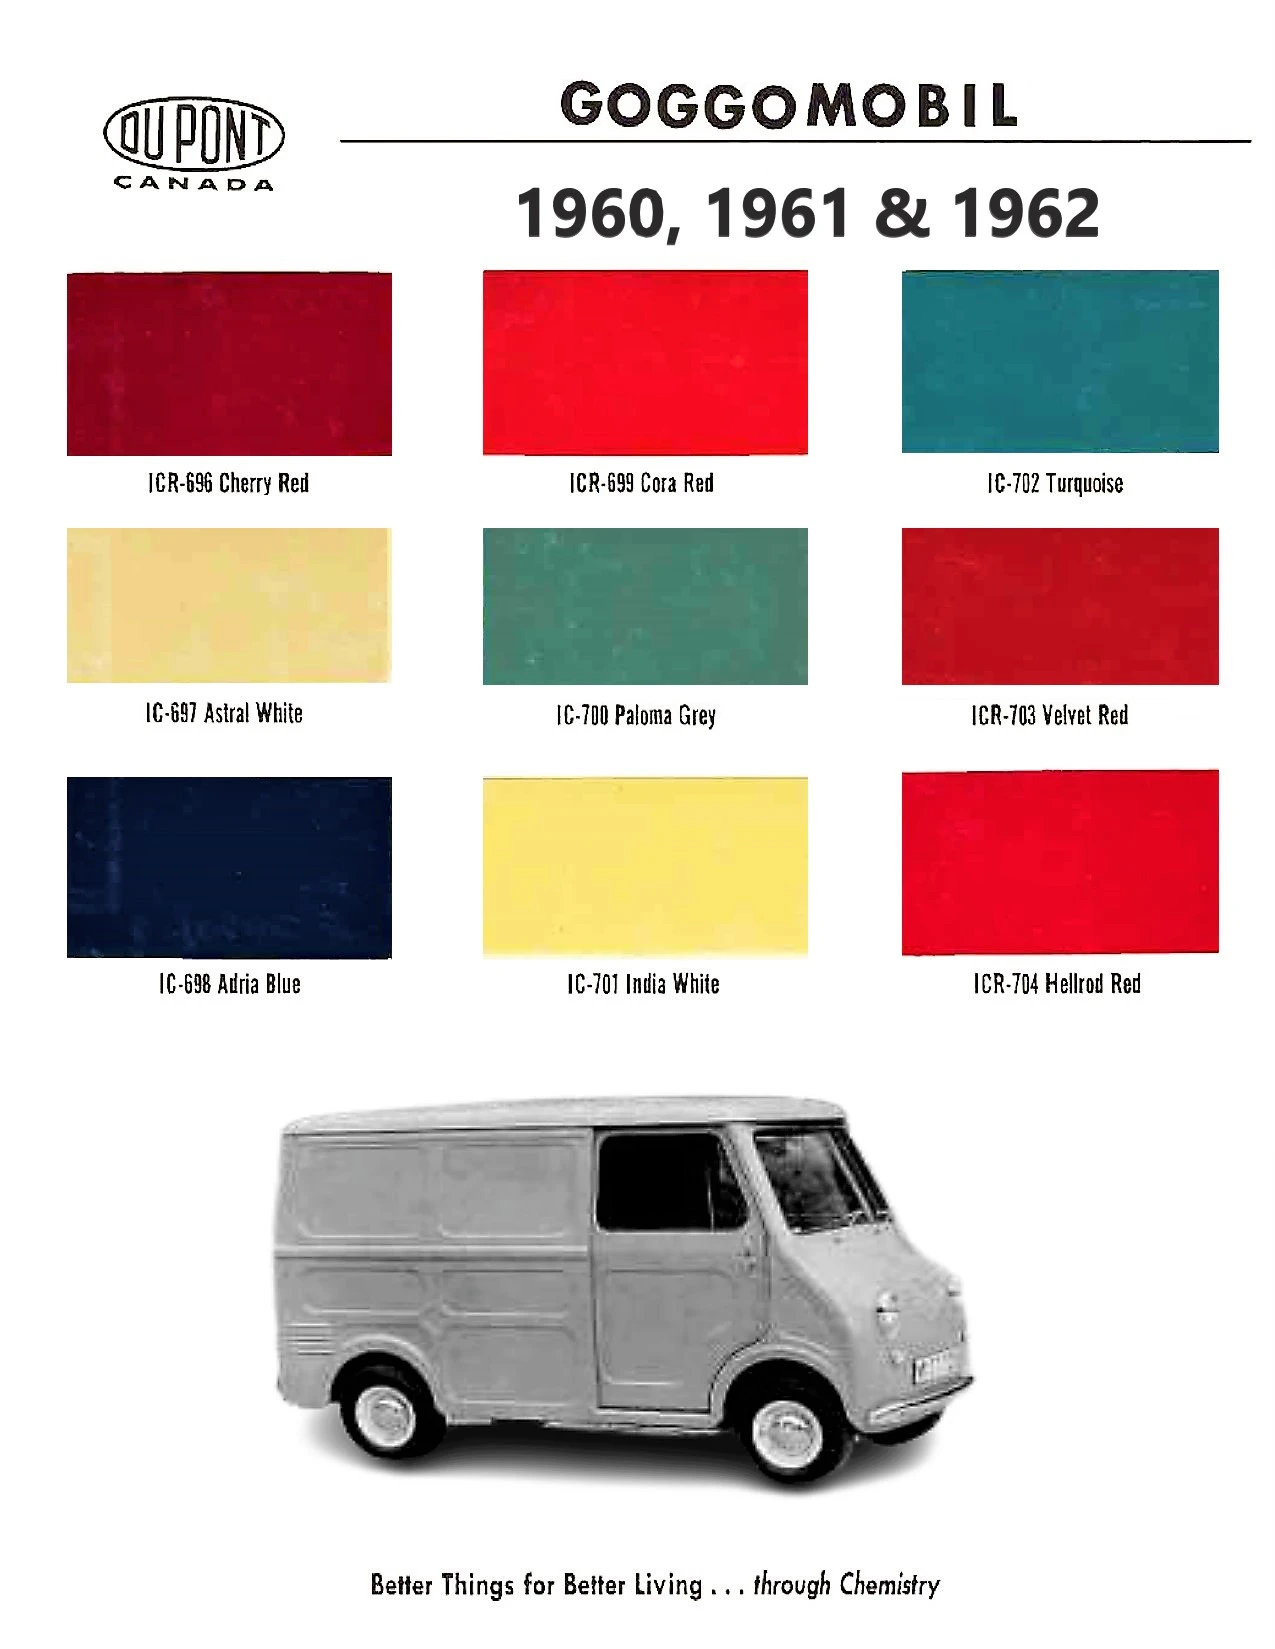 paint codes for the gogomobile or Goggomobil vehicle in 1960, 1961, & 1962.  A picture of a goggomobil van at the bottom